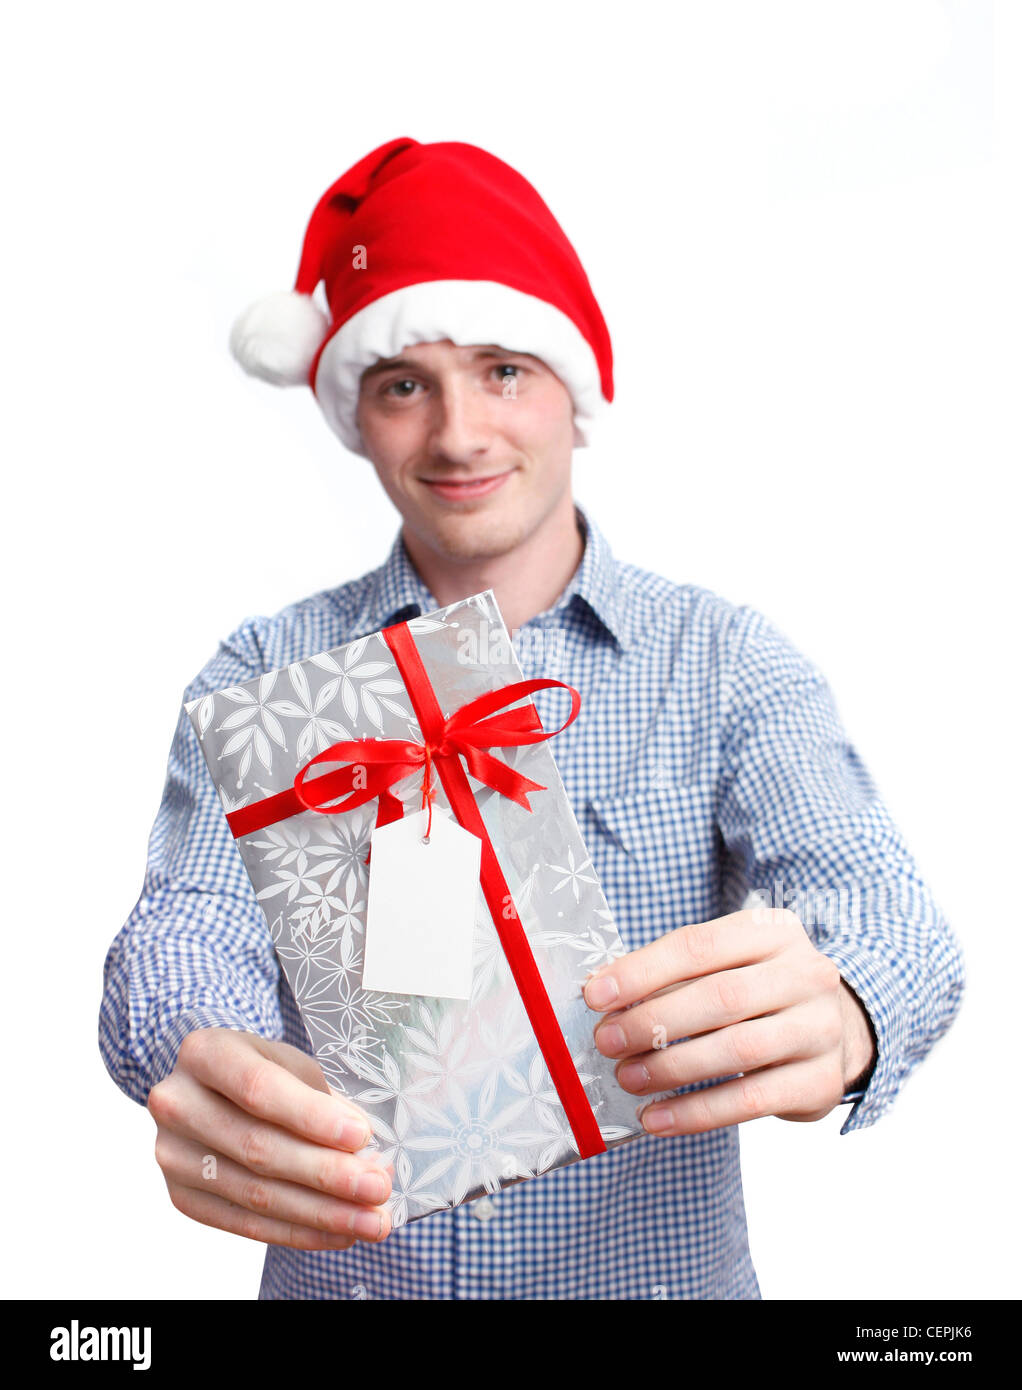 Man with santa hat holding christmas present Banque D'Images